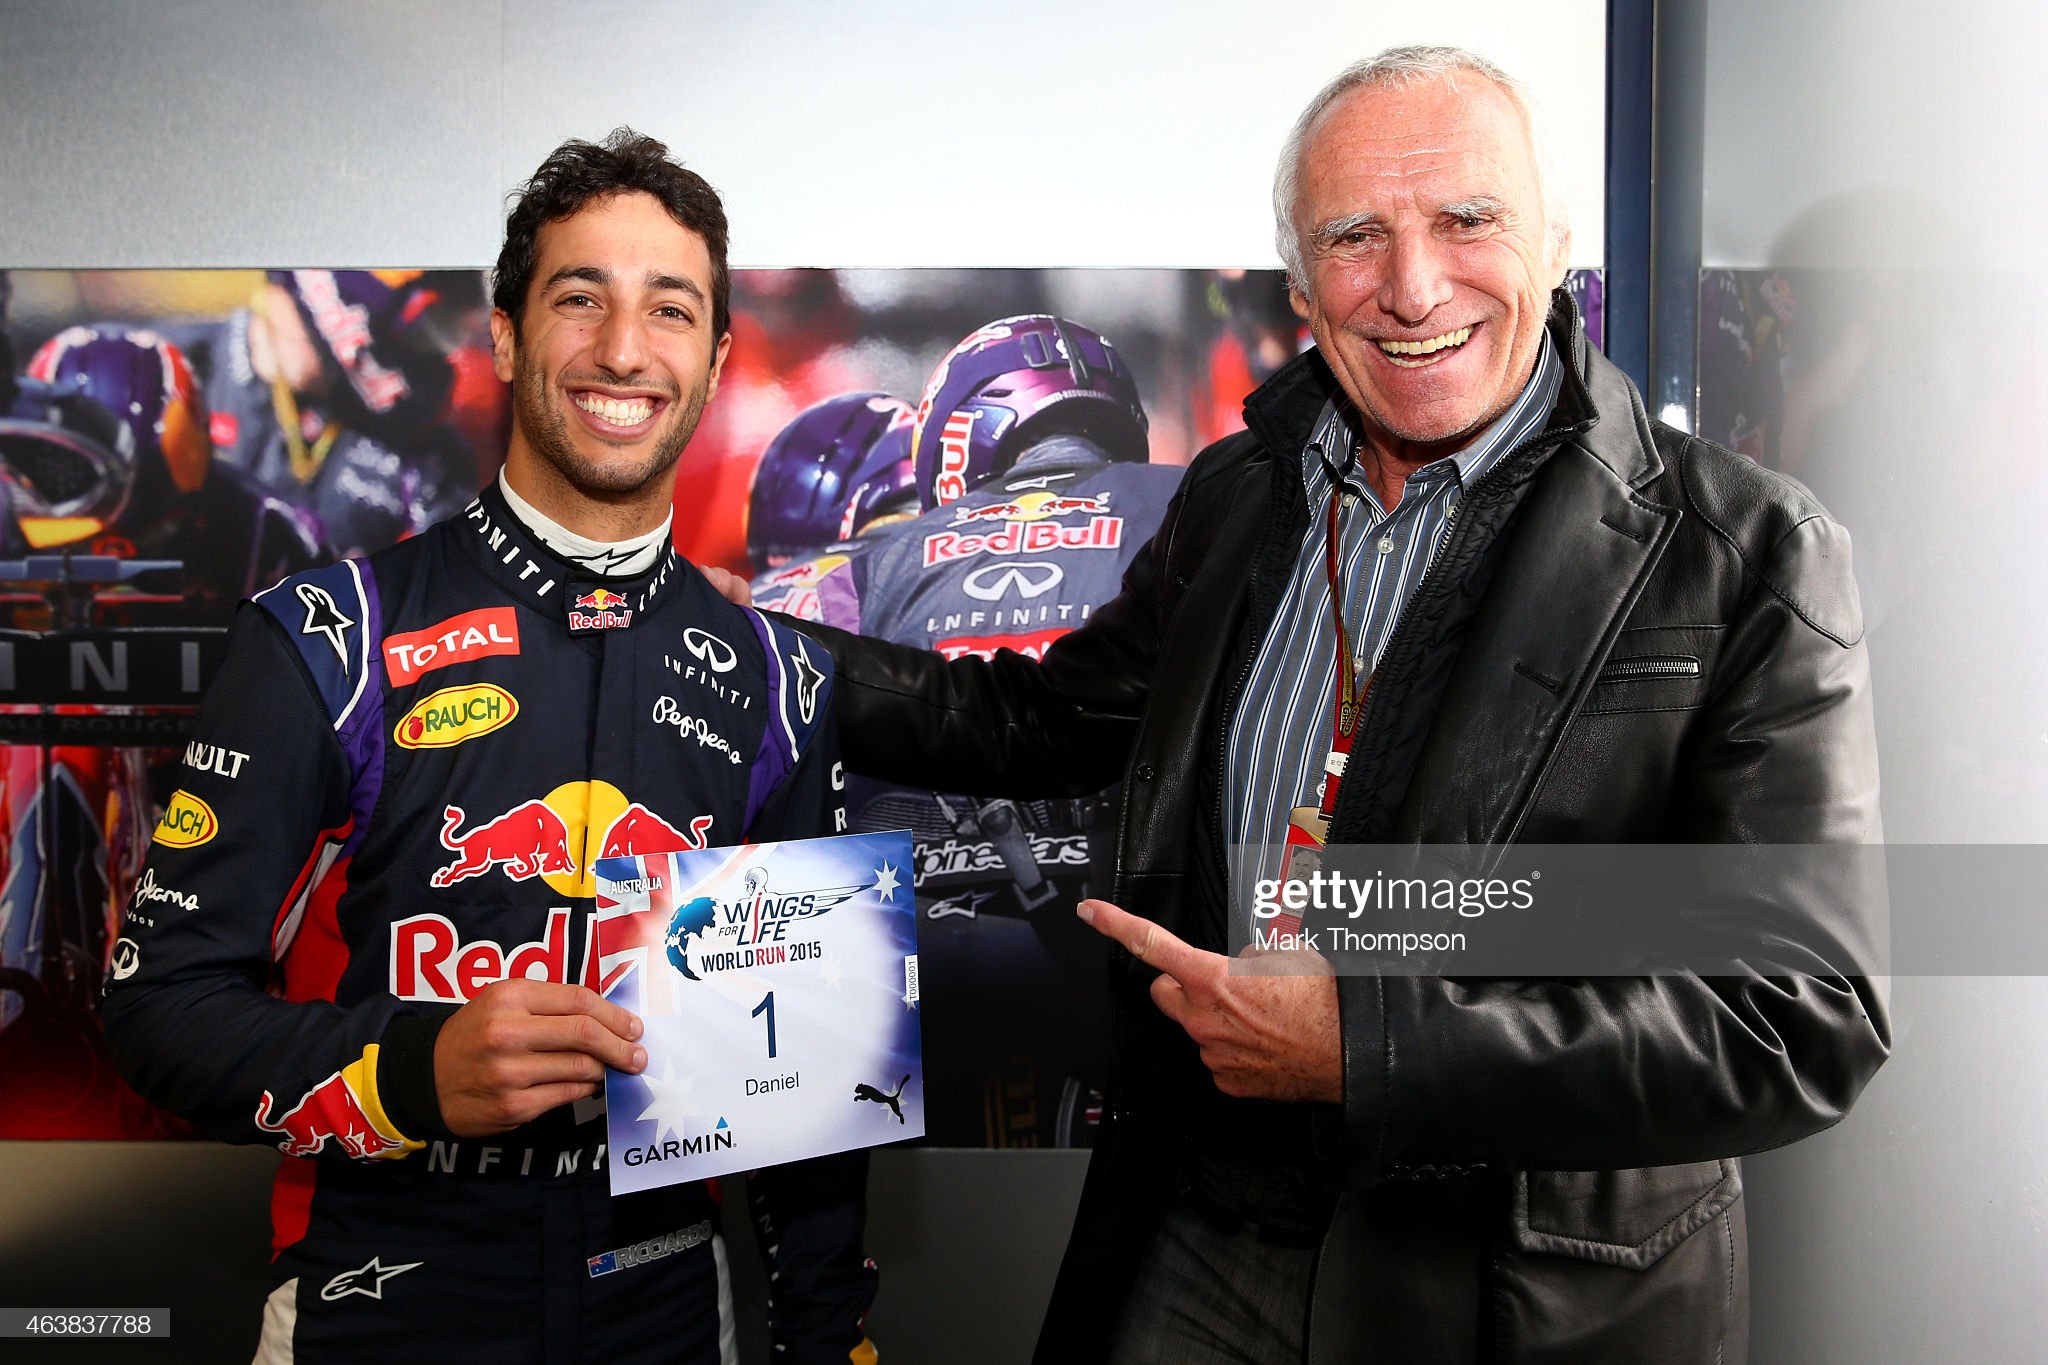 Red Bull Racing's driver Daniel Ricciardo of Australia receiving bib number 1 for the ‘Wings of Live World Run’ from team owner, CEO of the Austria energy drink producer Red Bull and founder of ‘Wings for Life’, a non profit spinal cord research foundation, Dietrich Mateschitz.